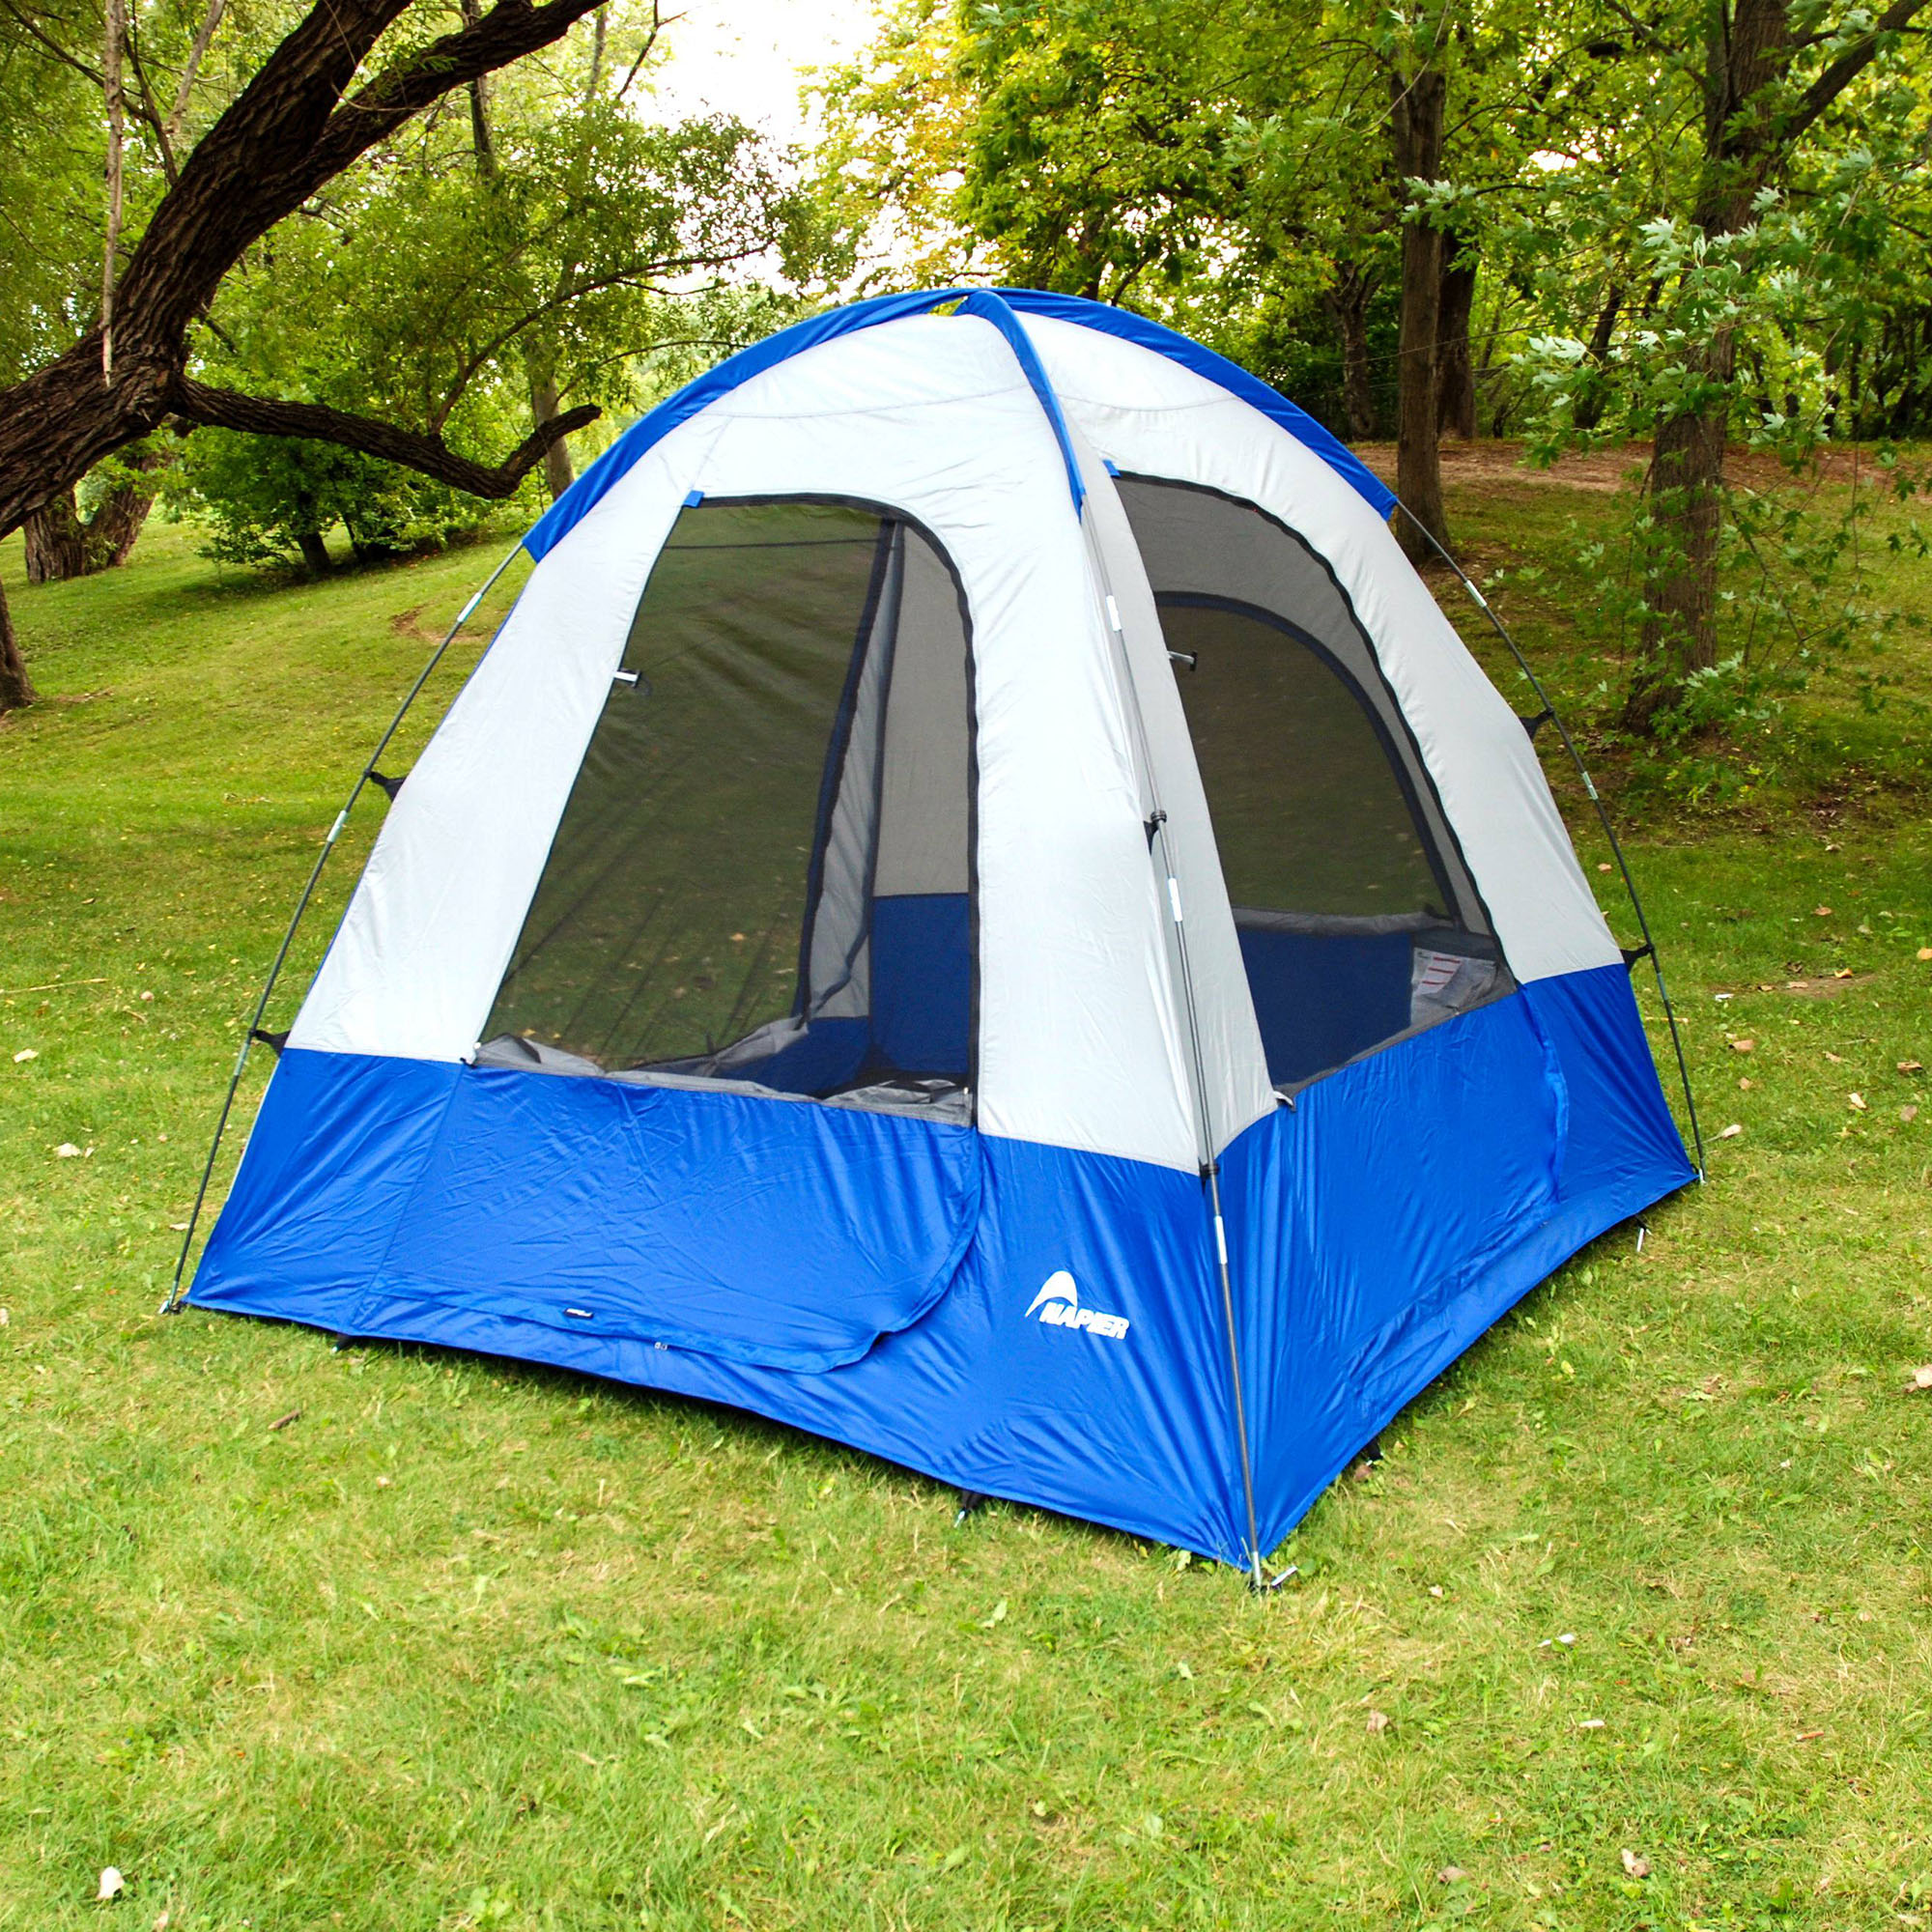 Napier Sportz Dome-To-Go Universal SUV Cargo 4 Person Camping Tent with Awning - image 5 of 7